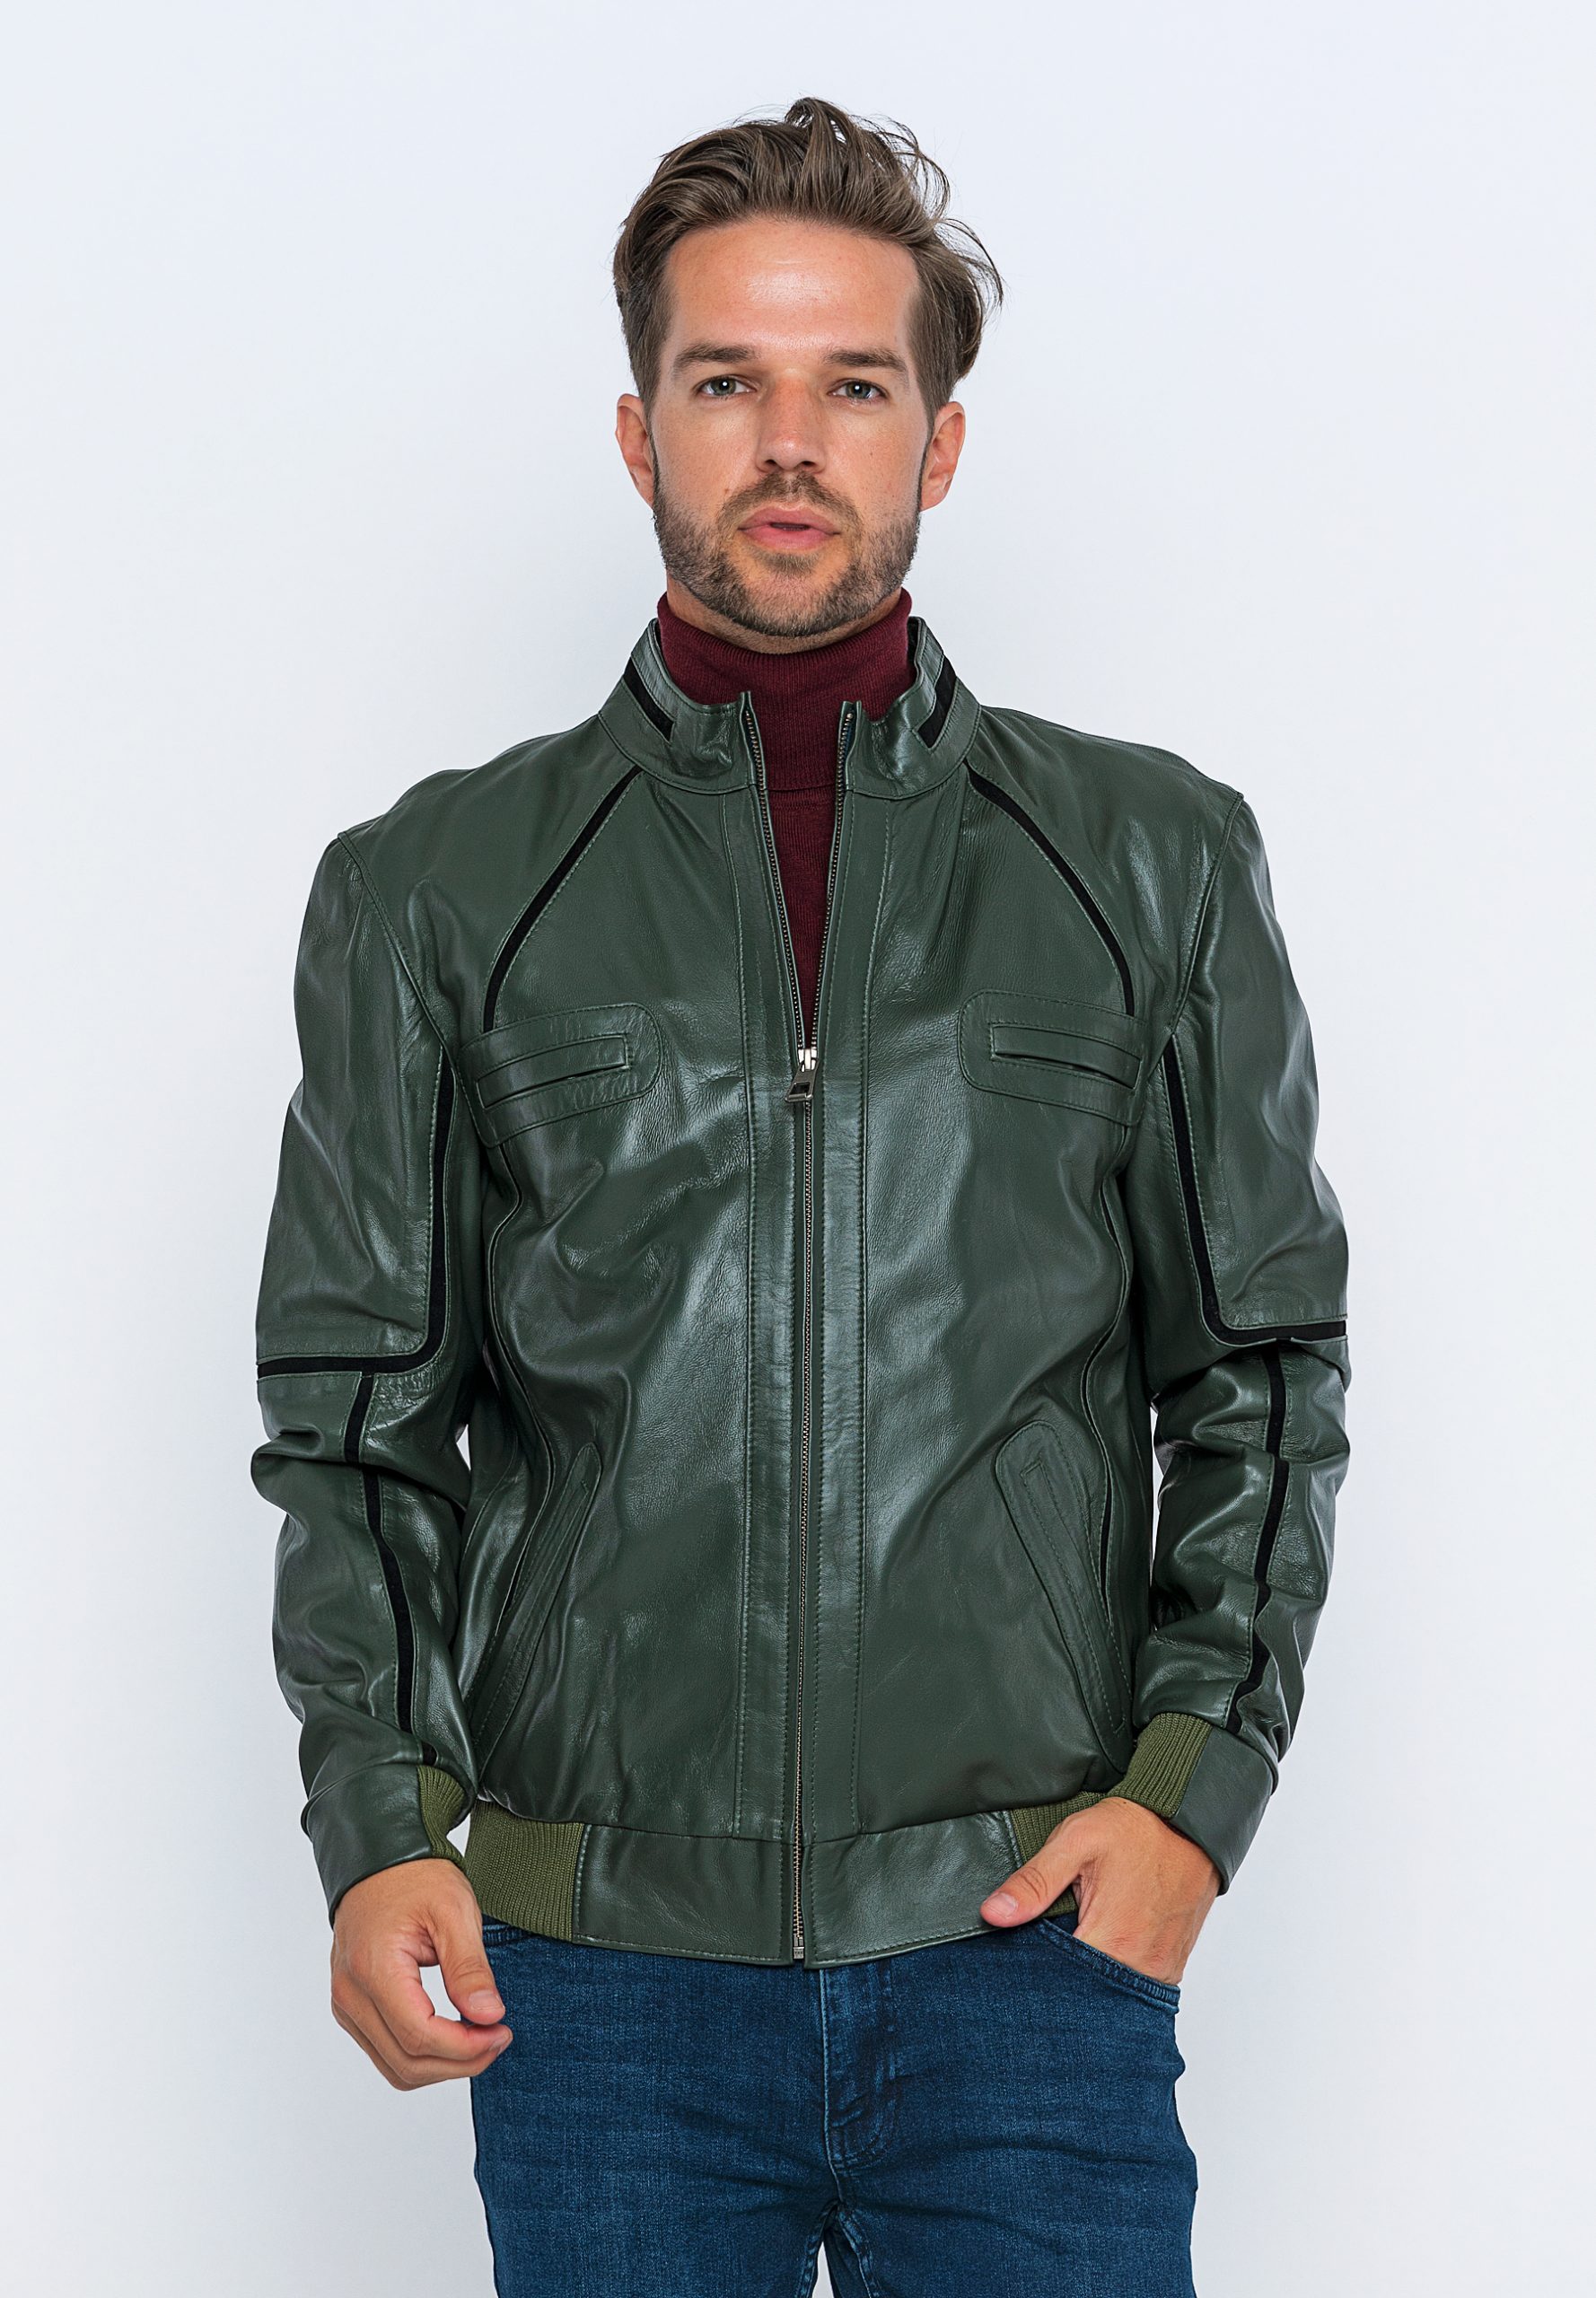 Men's Green Leather & Faux Leather Jackets | Nordstrom